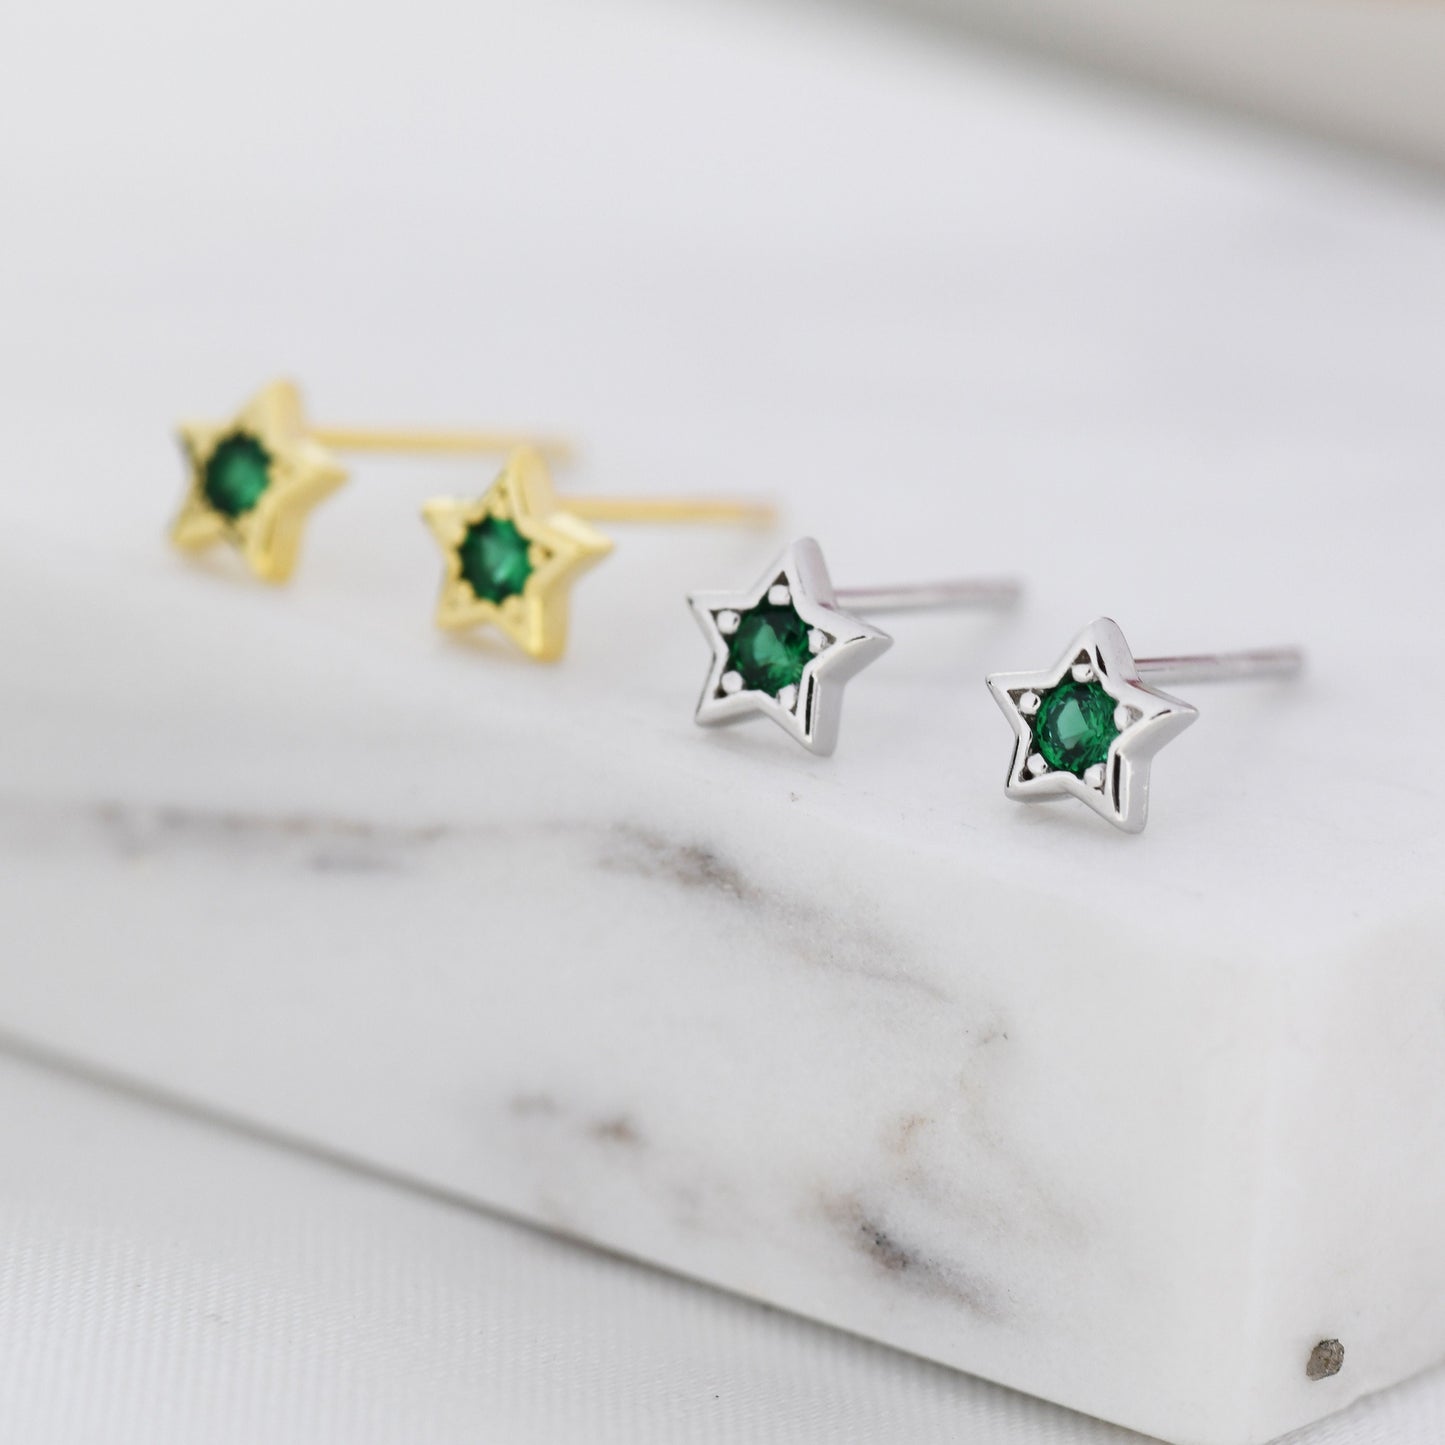 Tiny Emerald Green CZ Star Stud Earrings in Sterling Silver, Silver or Gold,  Green Crystal Star Earrings, Stacking Earrings